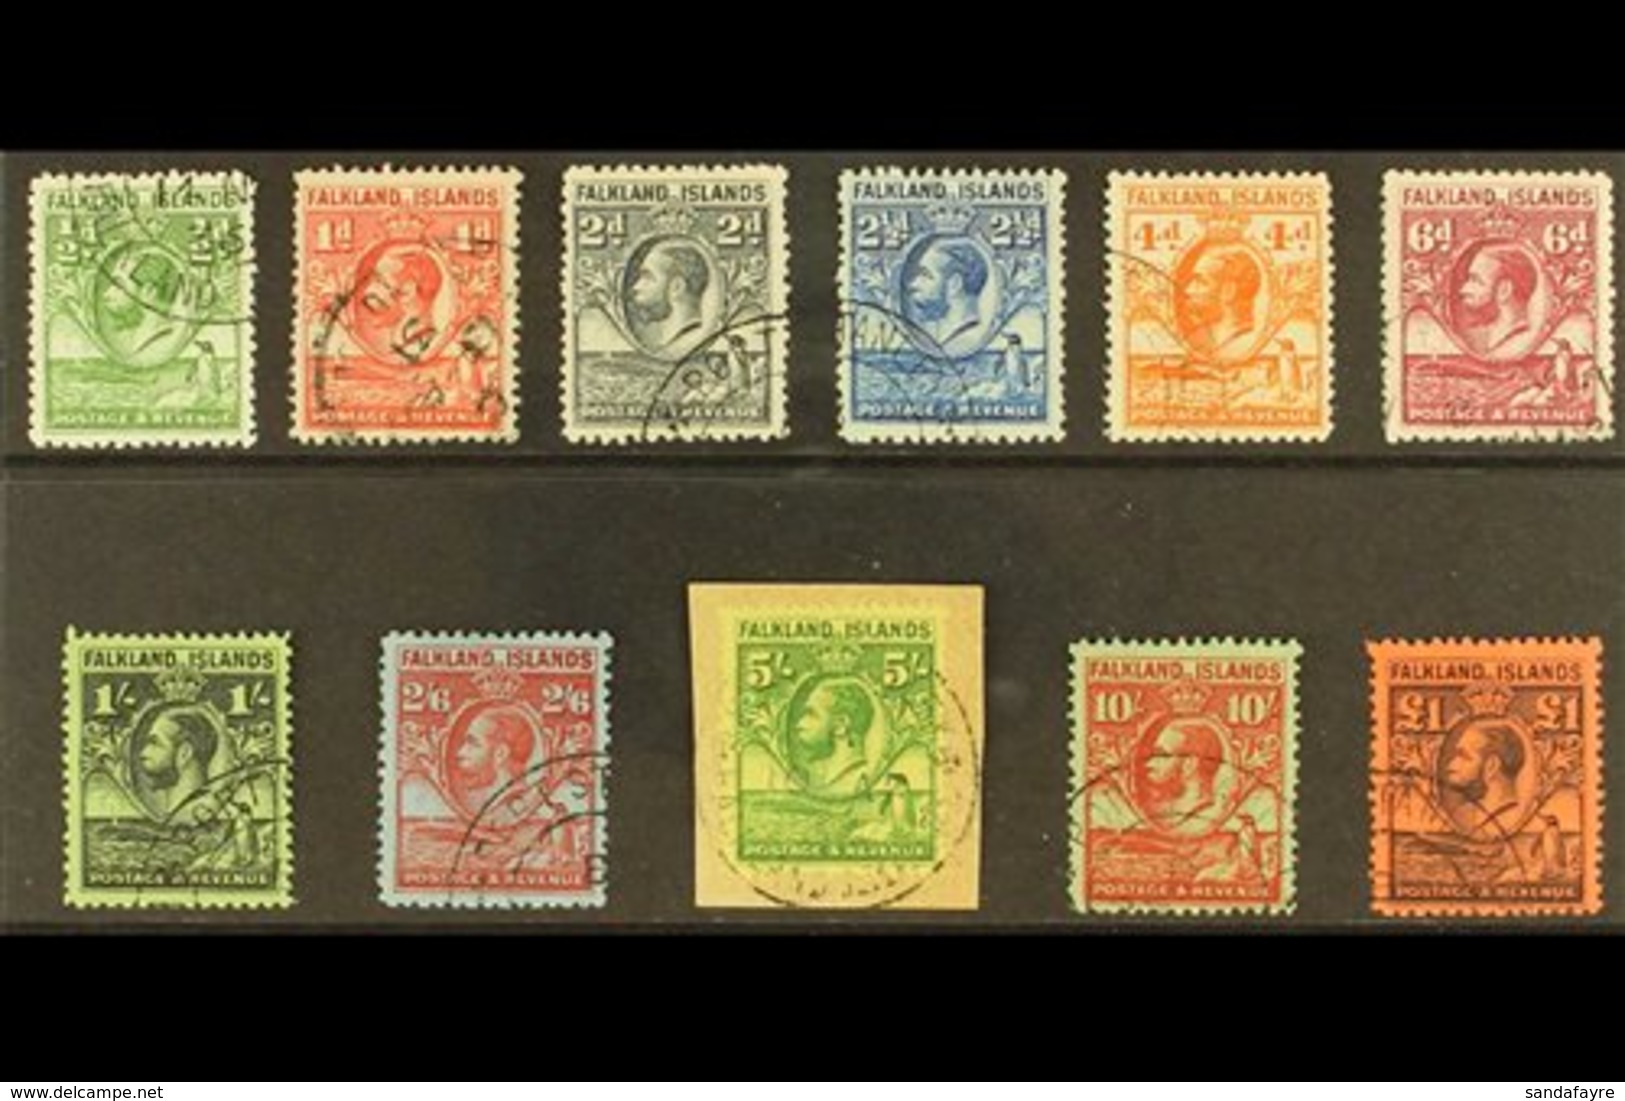 1929-37  KGV "Fin Whale And Gentoo Penguins" Complete Set, SG 116/26, Very Fine Used, The 5s Tied On Small Piece. Lovely - Falkland Islands